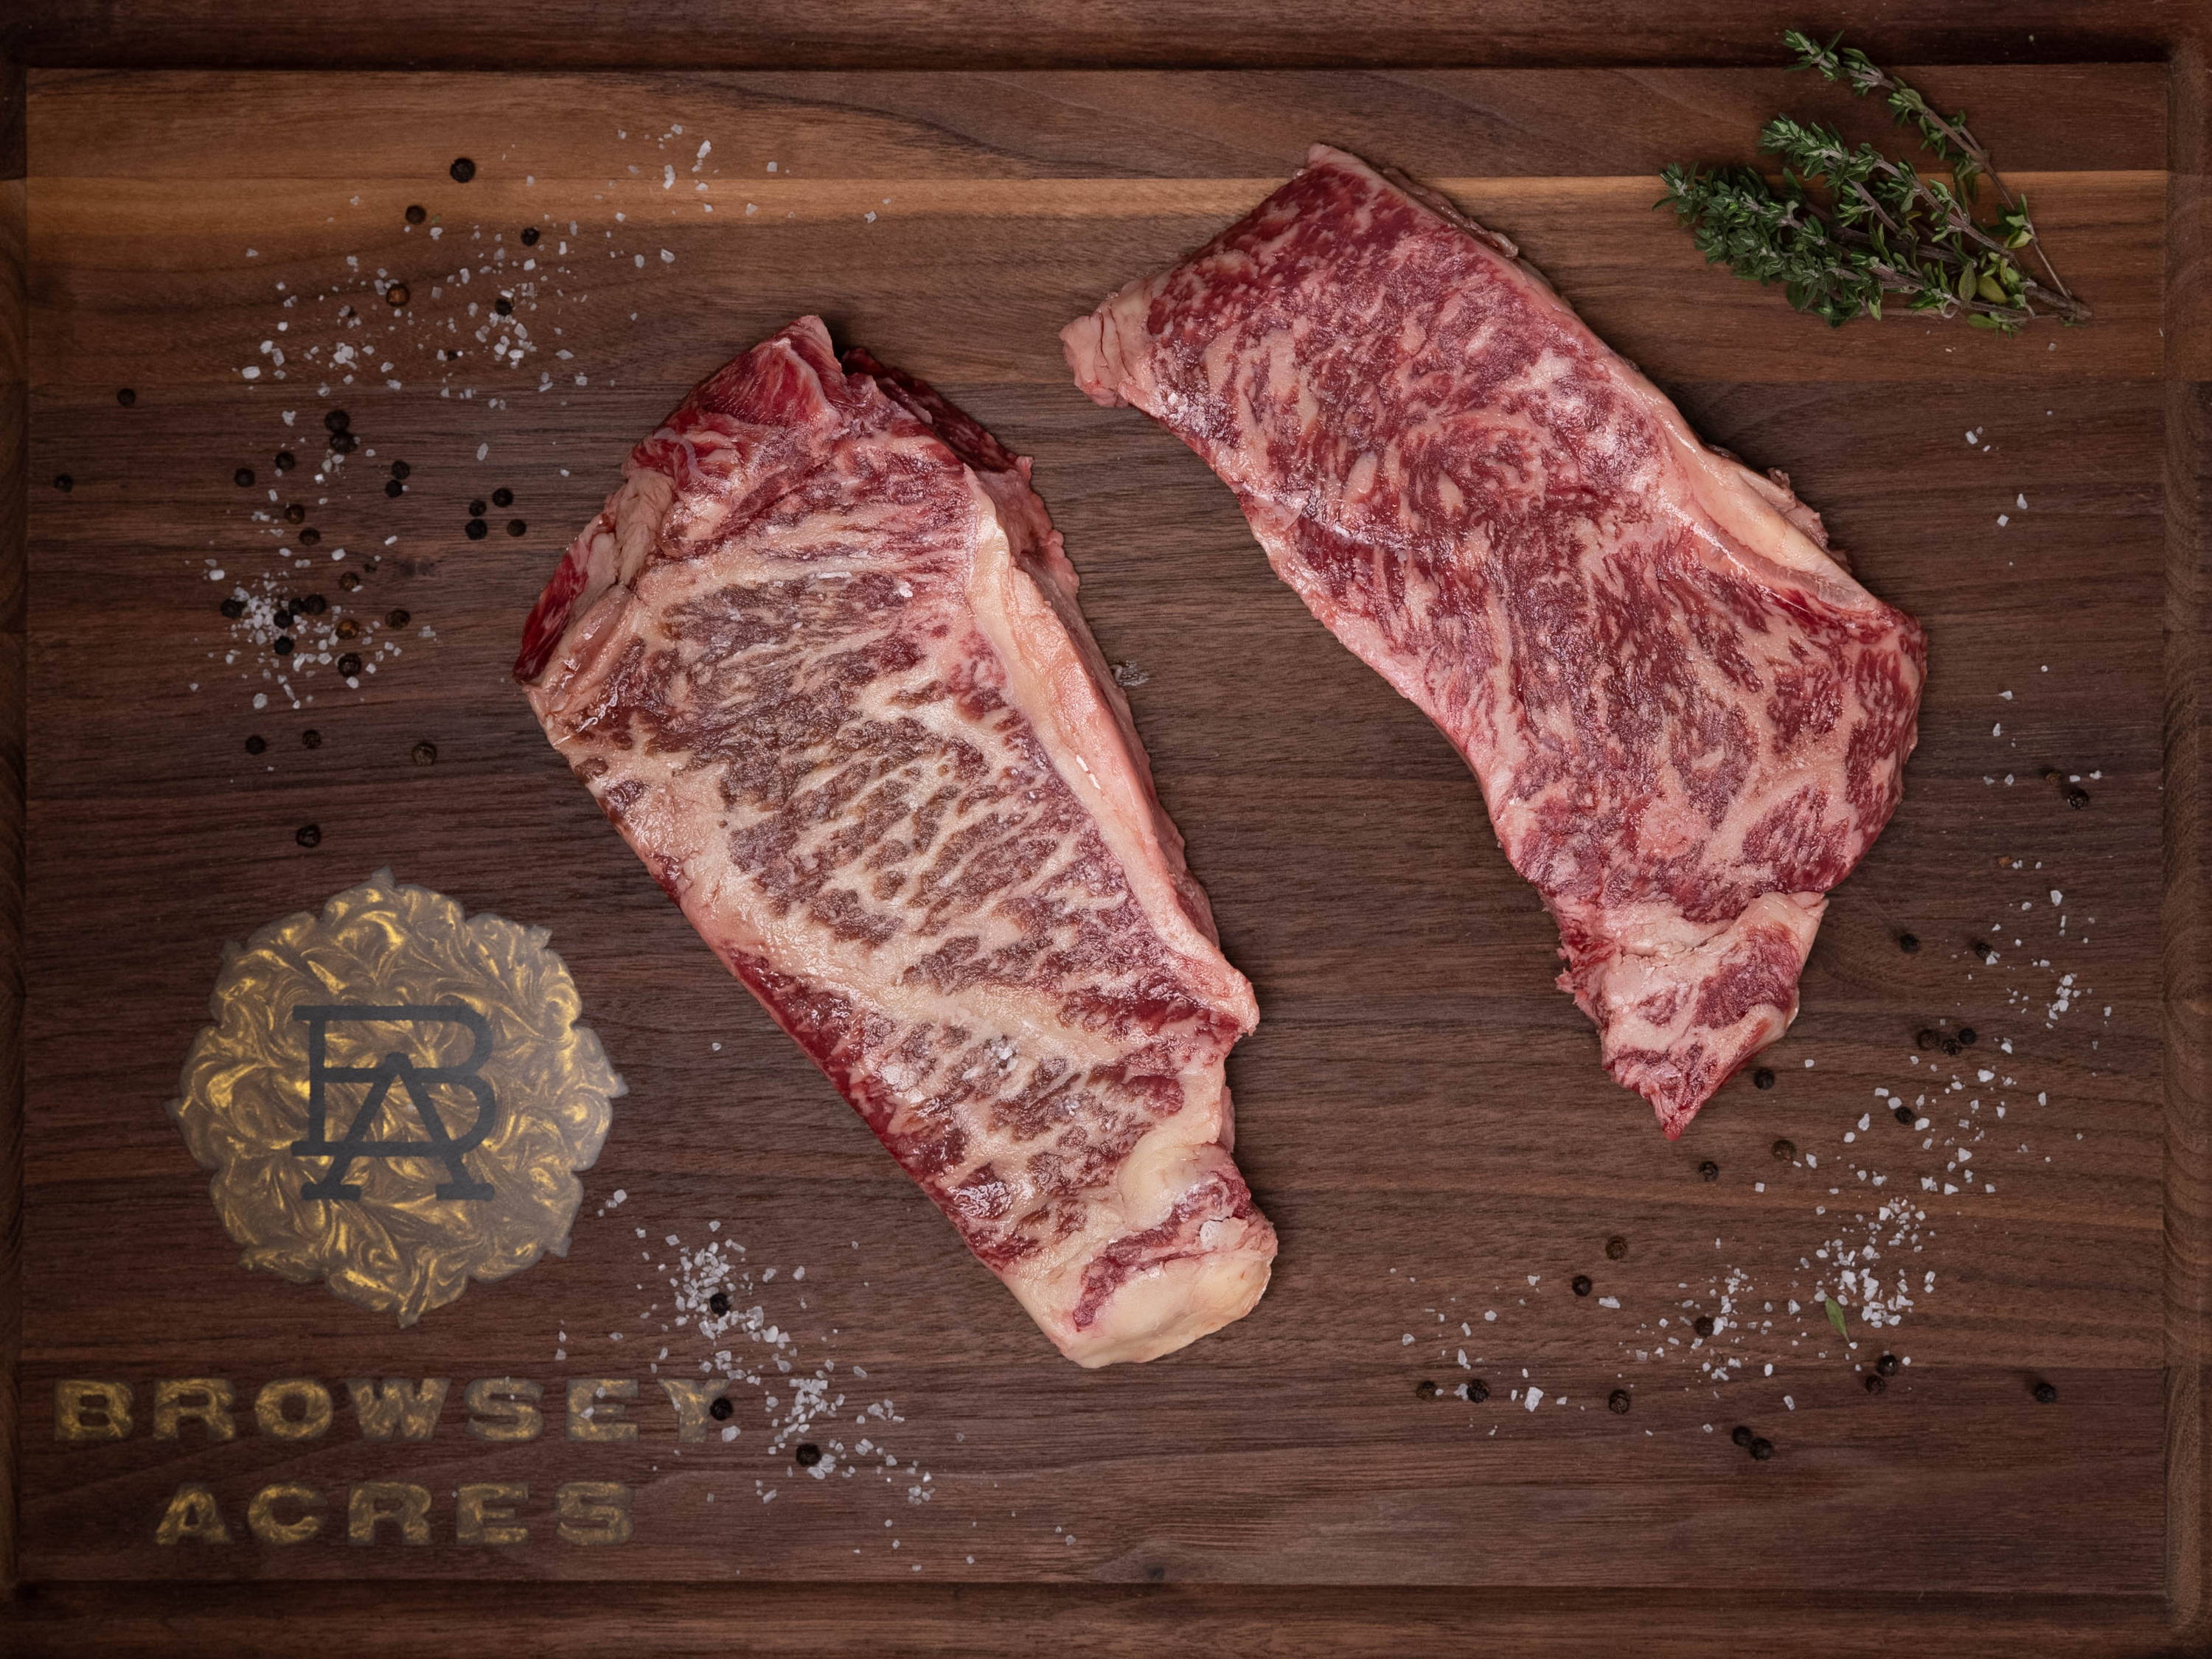 Wagyu 101: Cooking the Perfect Wagyu Steak on a Cast Iron Skillet — Browsey  Acres